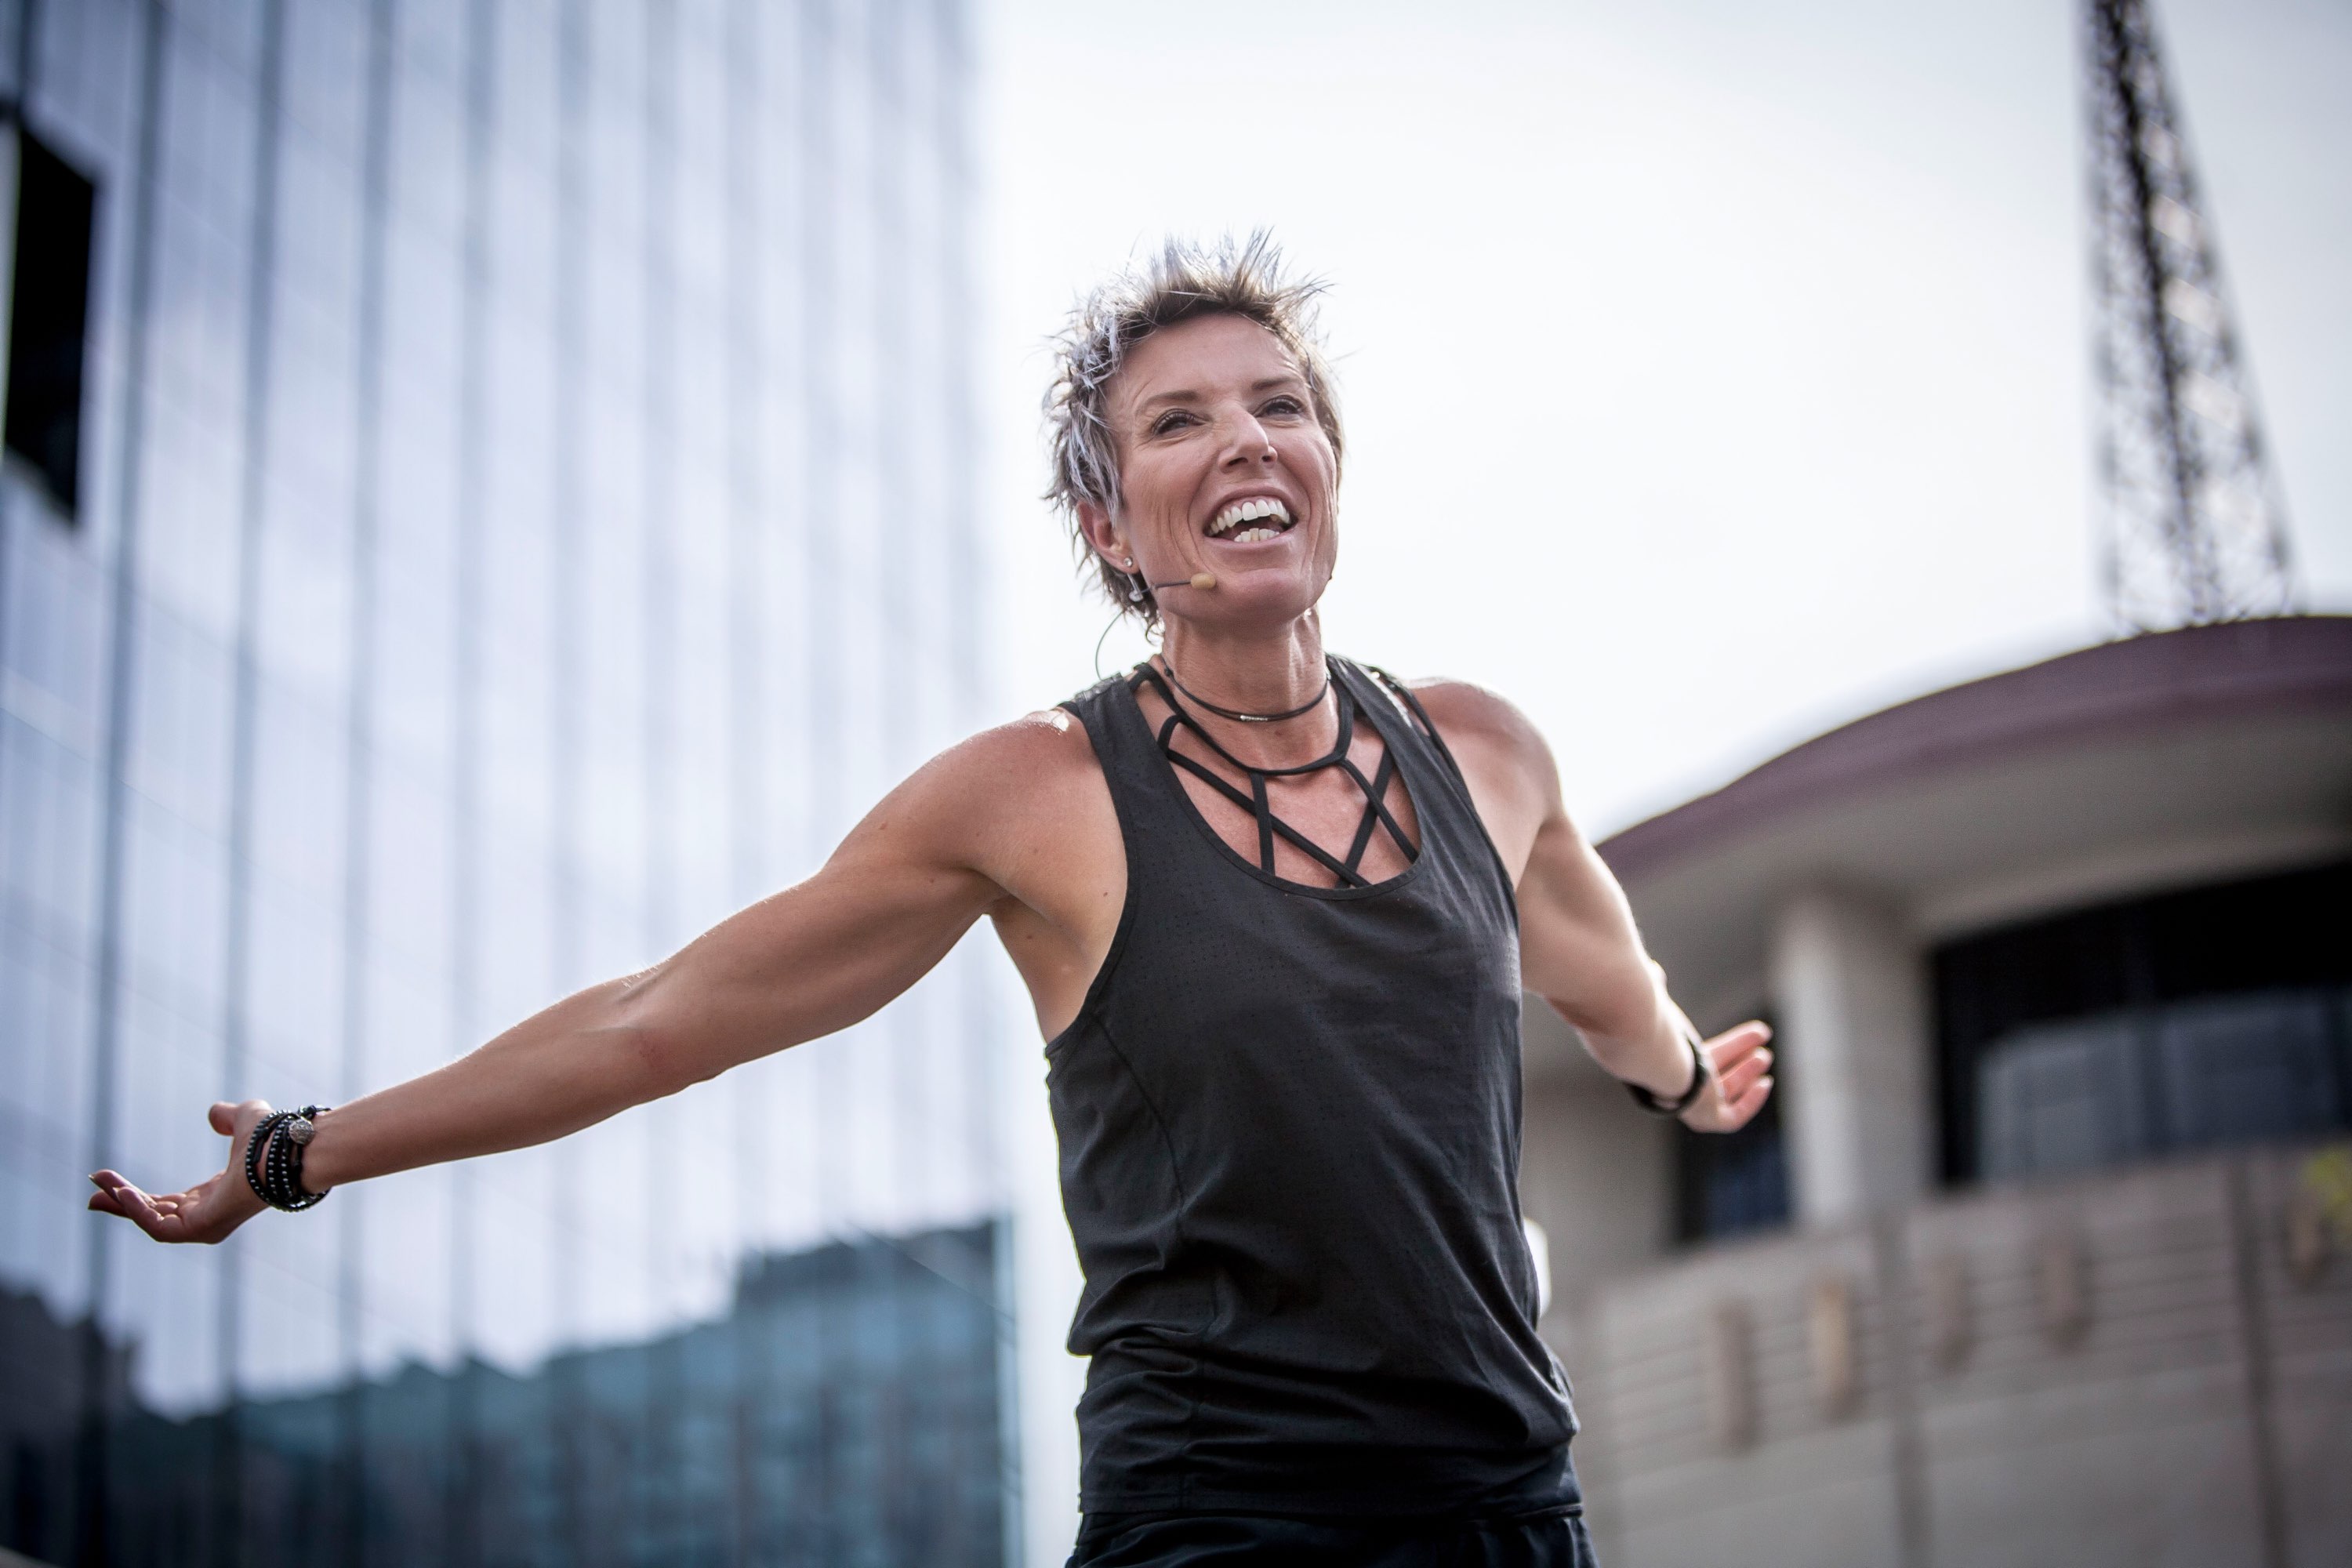 Celebrity Trainer Erin Oprea Gives Five Tips to a Healthier